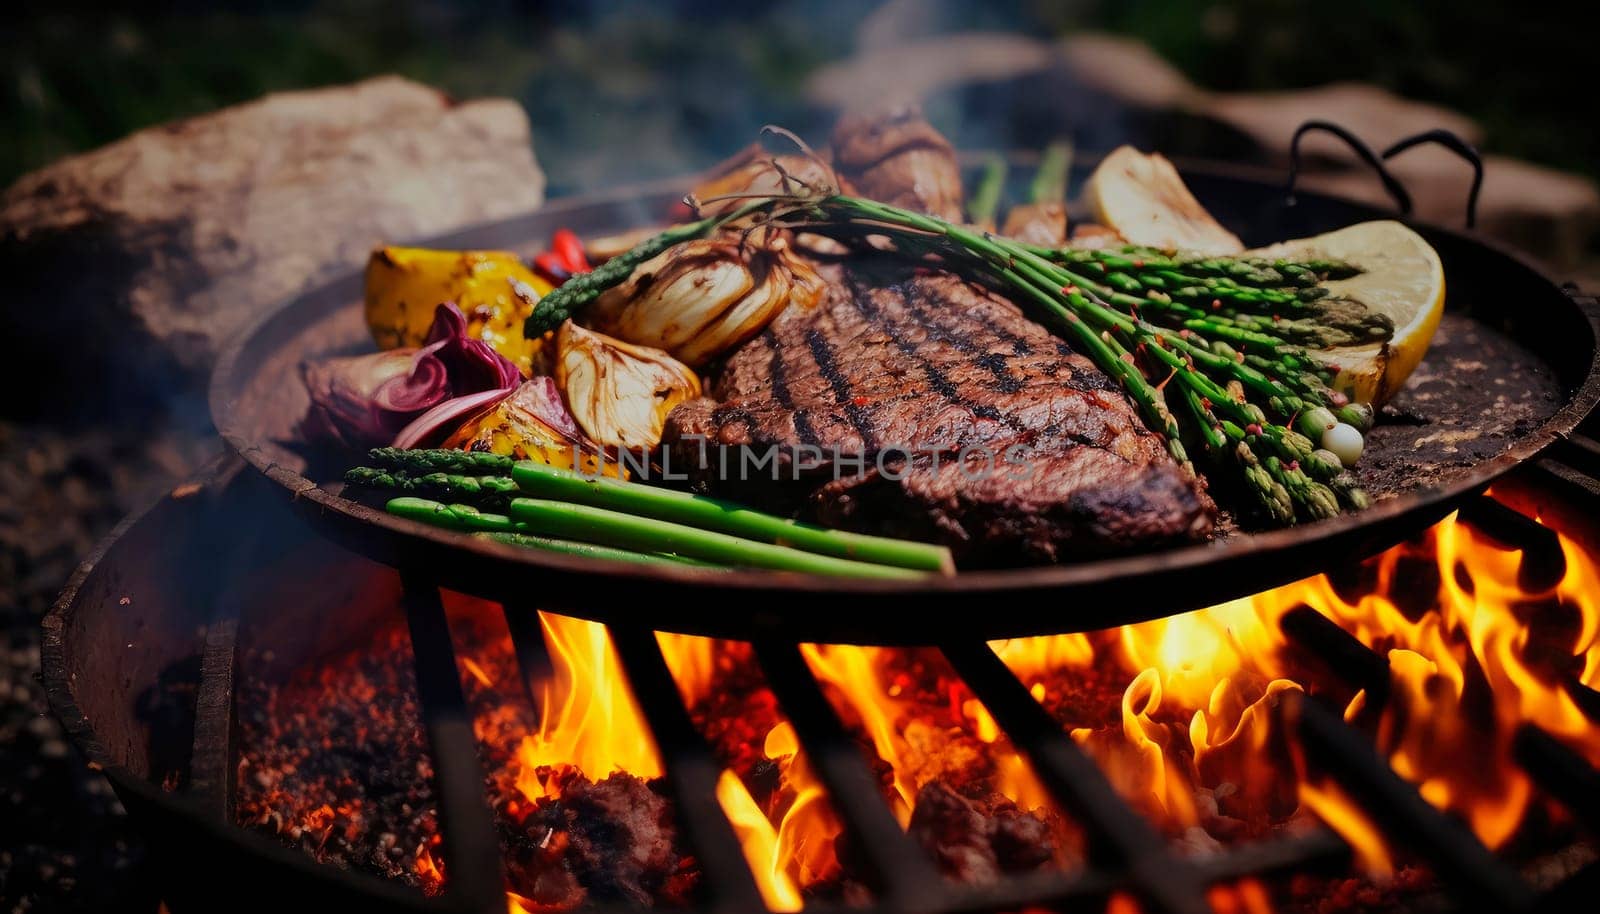 steak with vegetables is fried on coals on a black background. by yanadjana